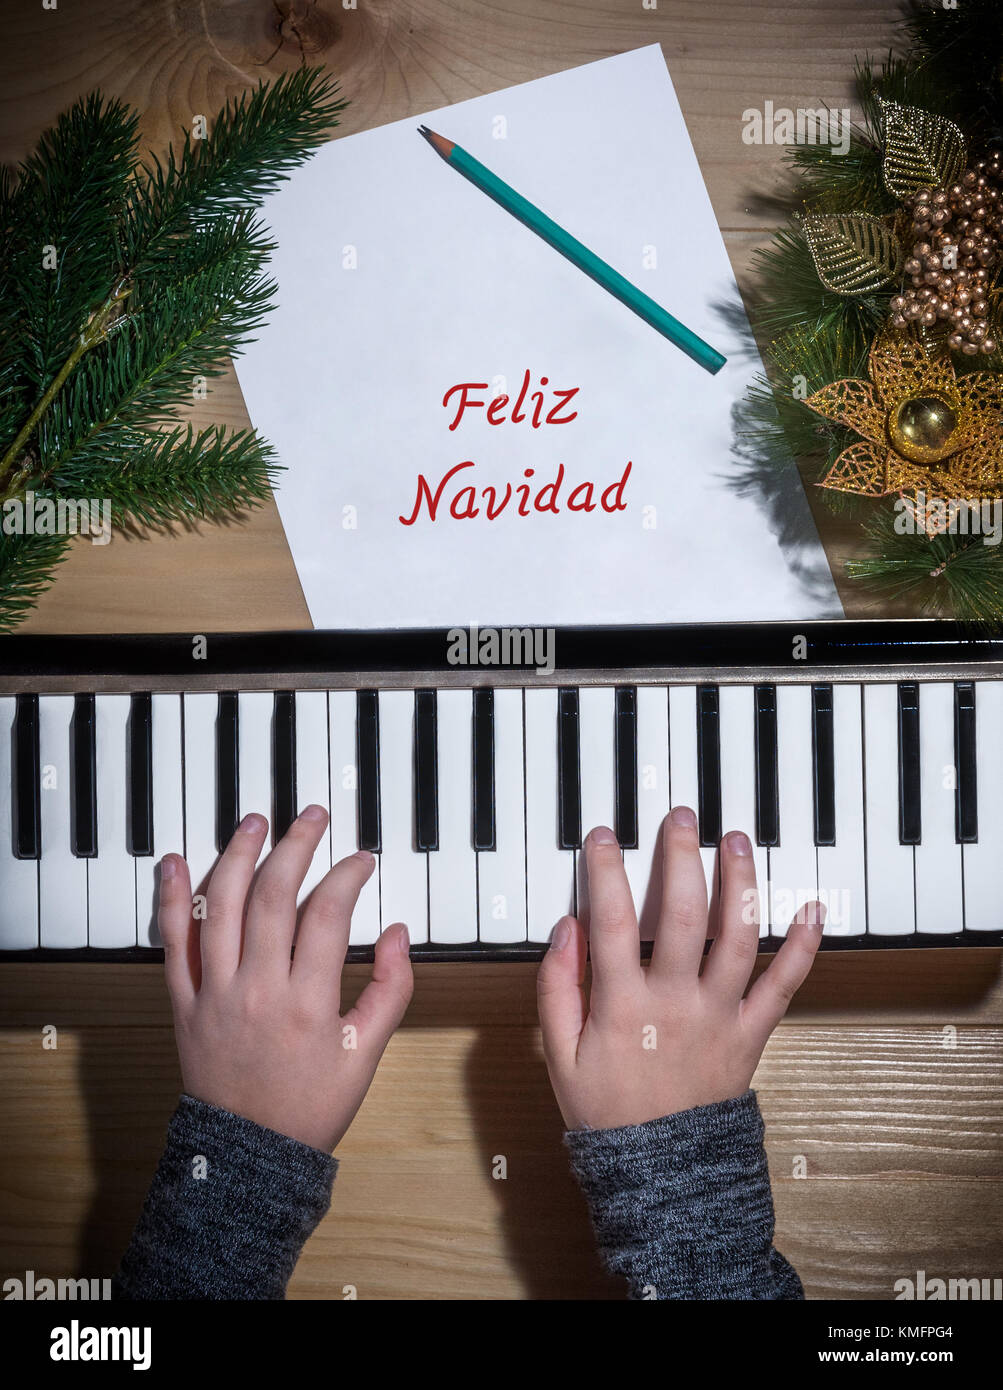 Feliz Navidad - Young hands of a girl playing on a keyboard with Christmas decorations on a wooden table Stock Photo